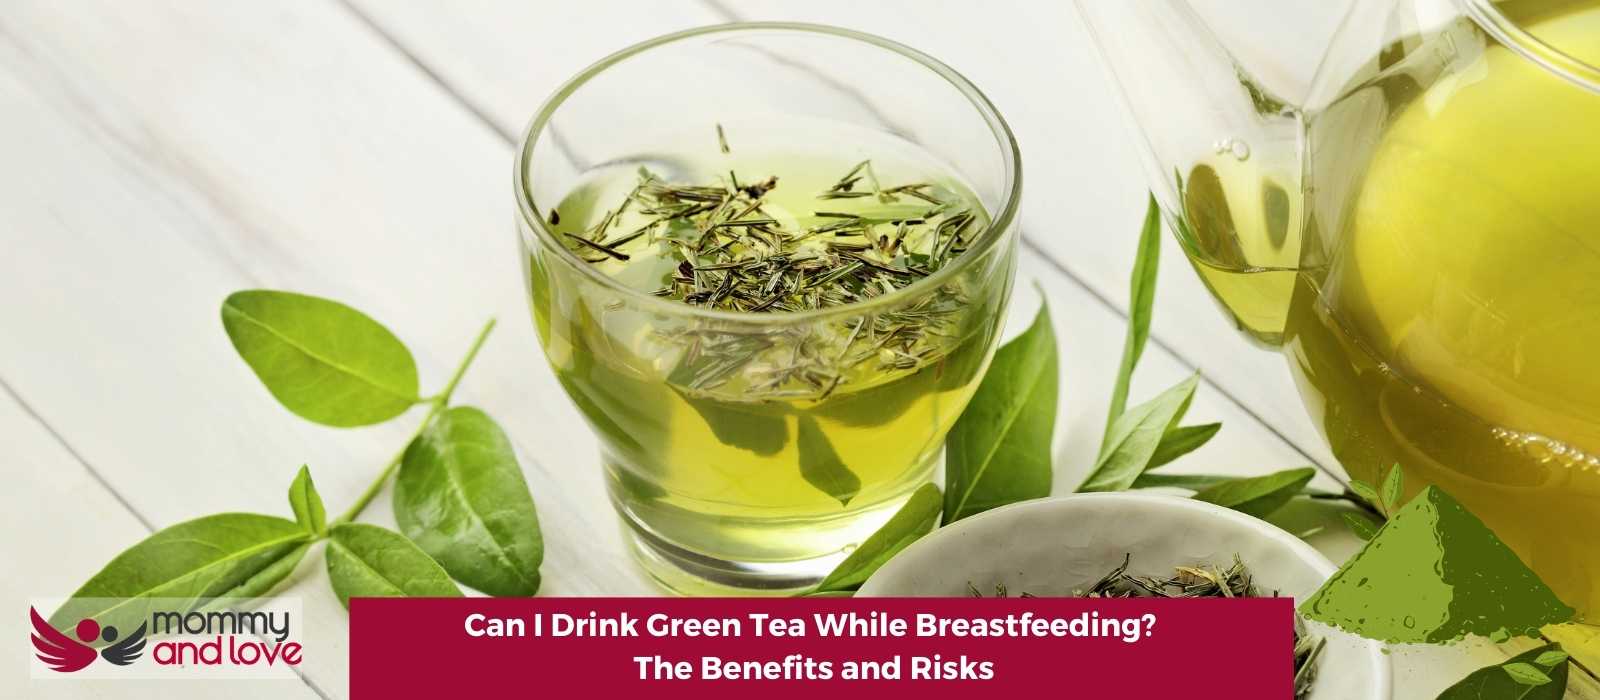 Can I Drink Green Tea While Breastfeeding The Benefits and Risks